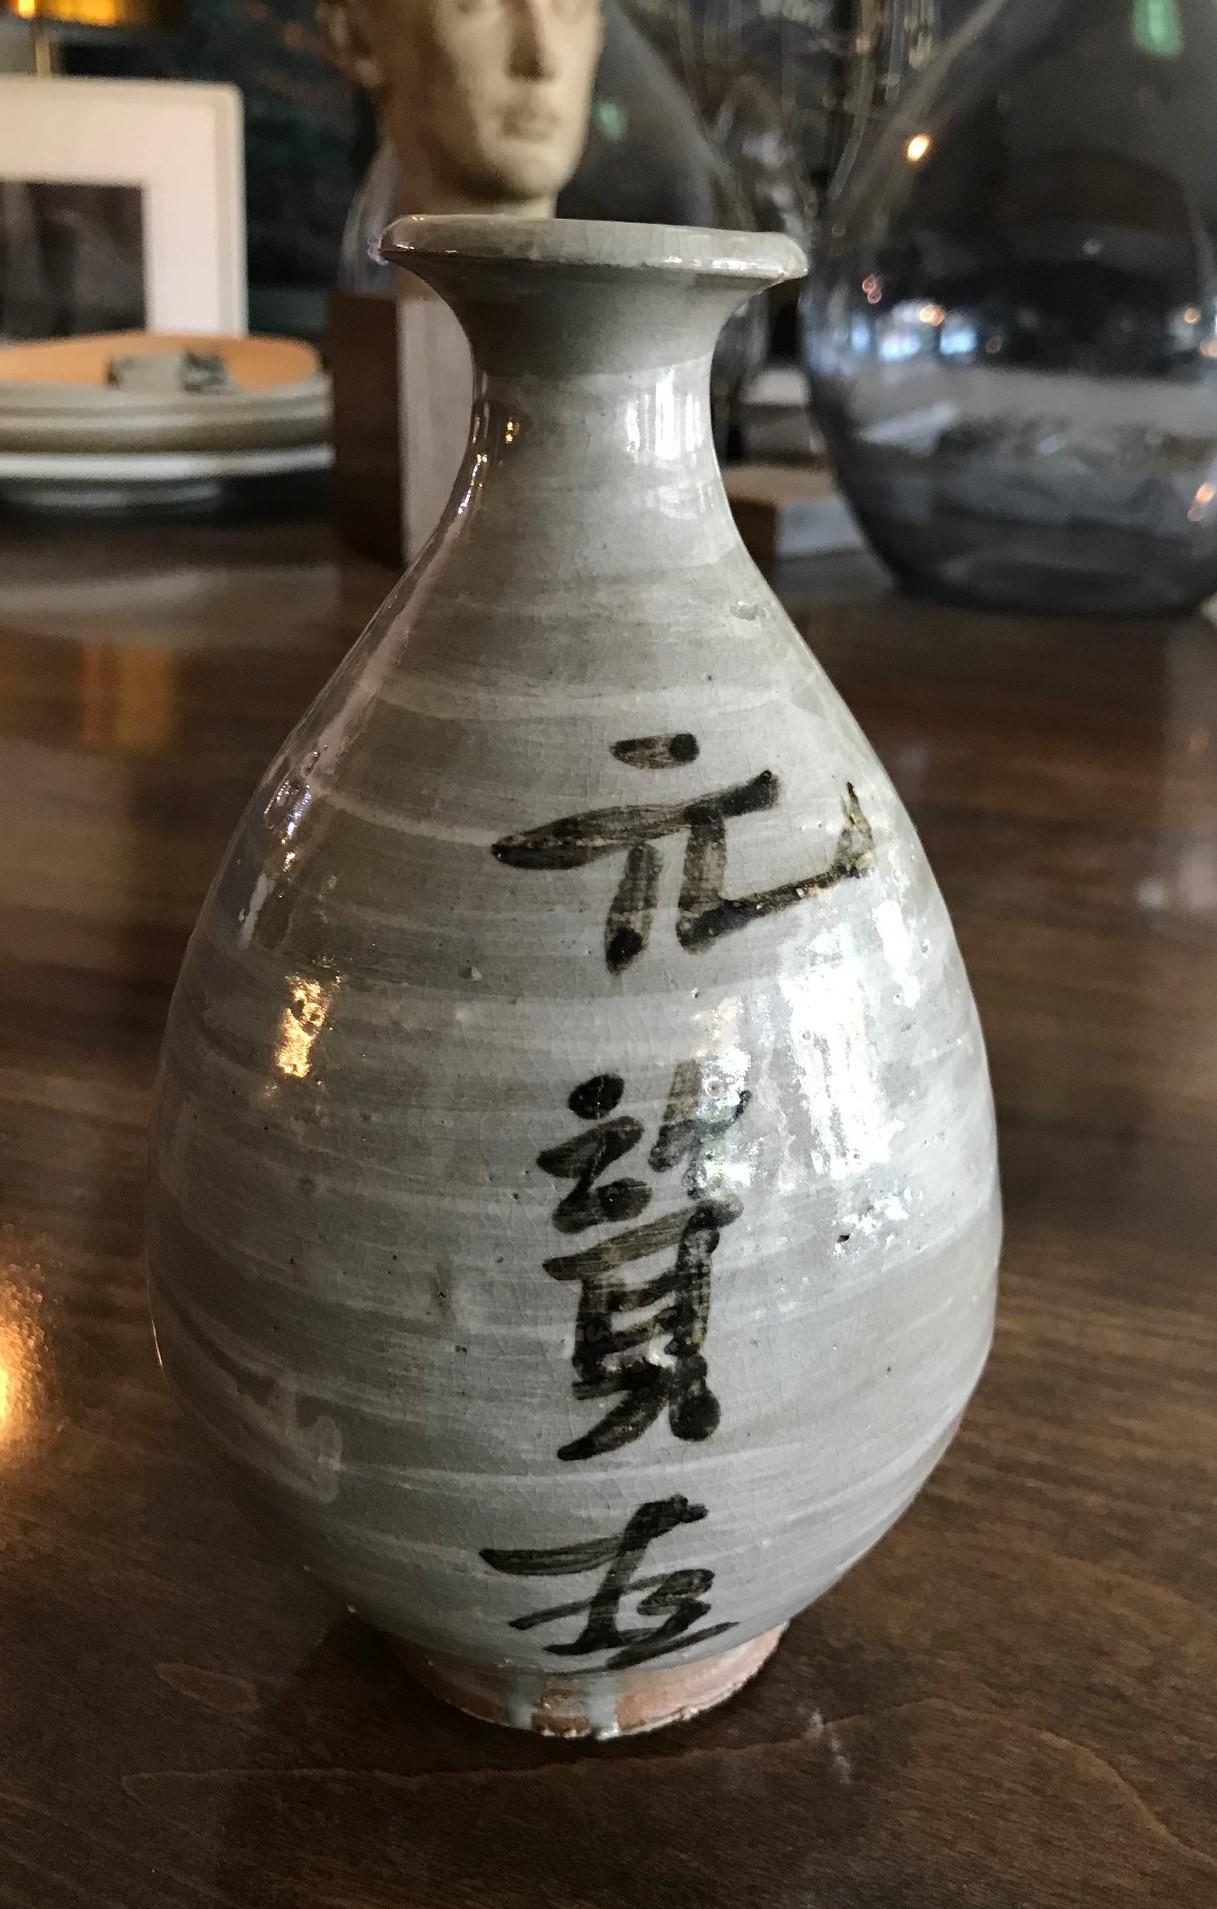 Korean Buncheong Joseon Dynasty Glazed Pottery Ceramic Calligraphy Vase In Good Condition For Sale In Studio City, CA